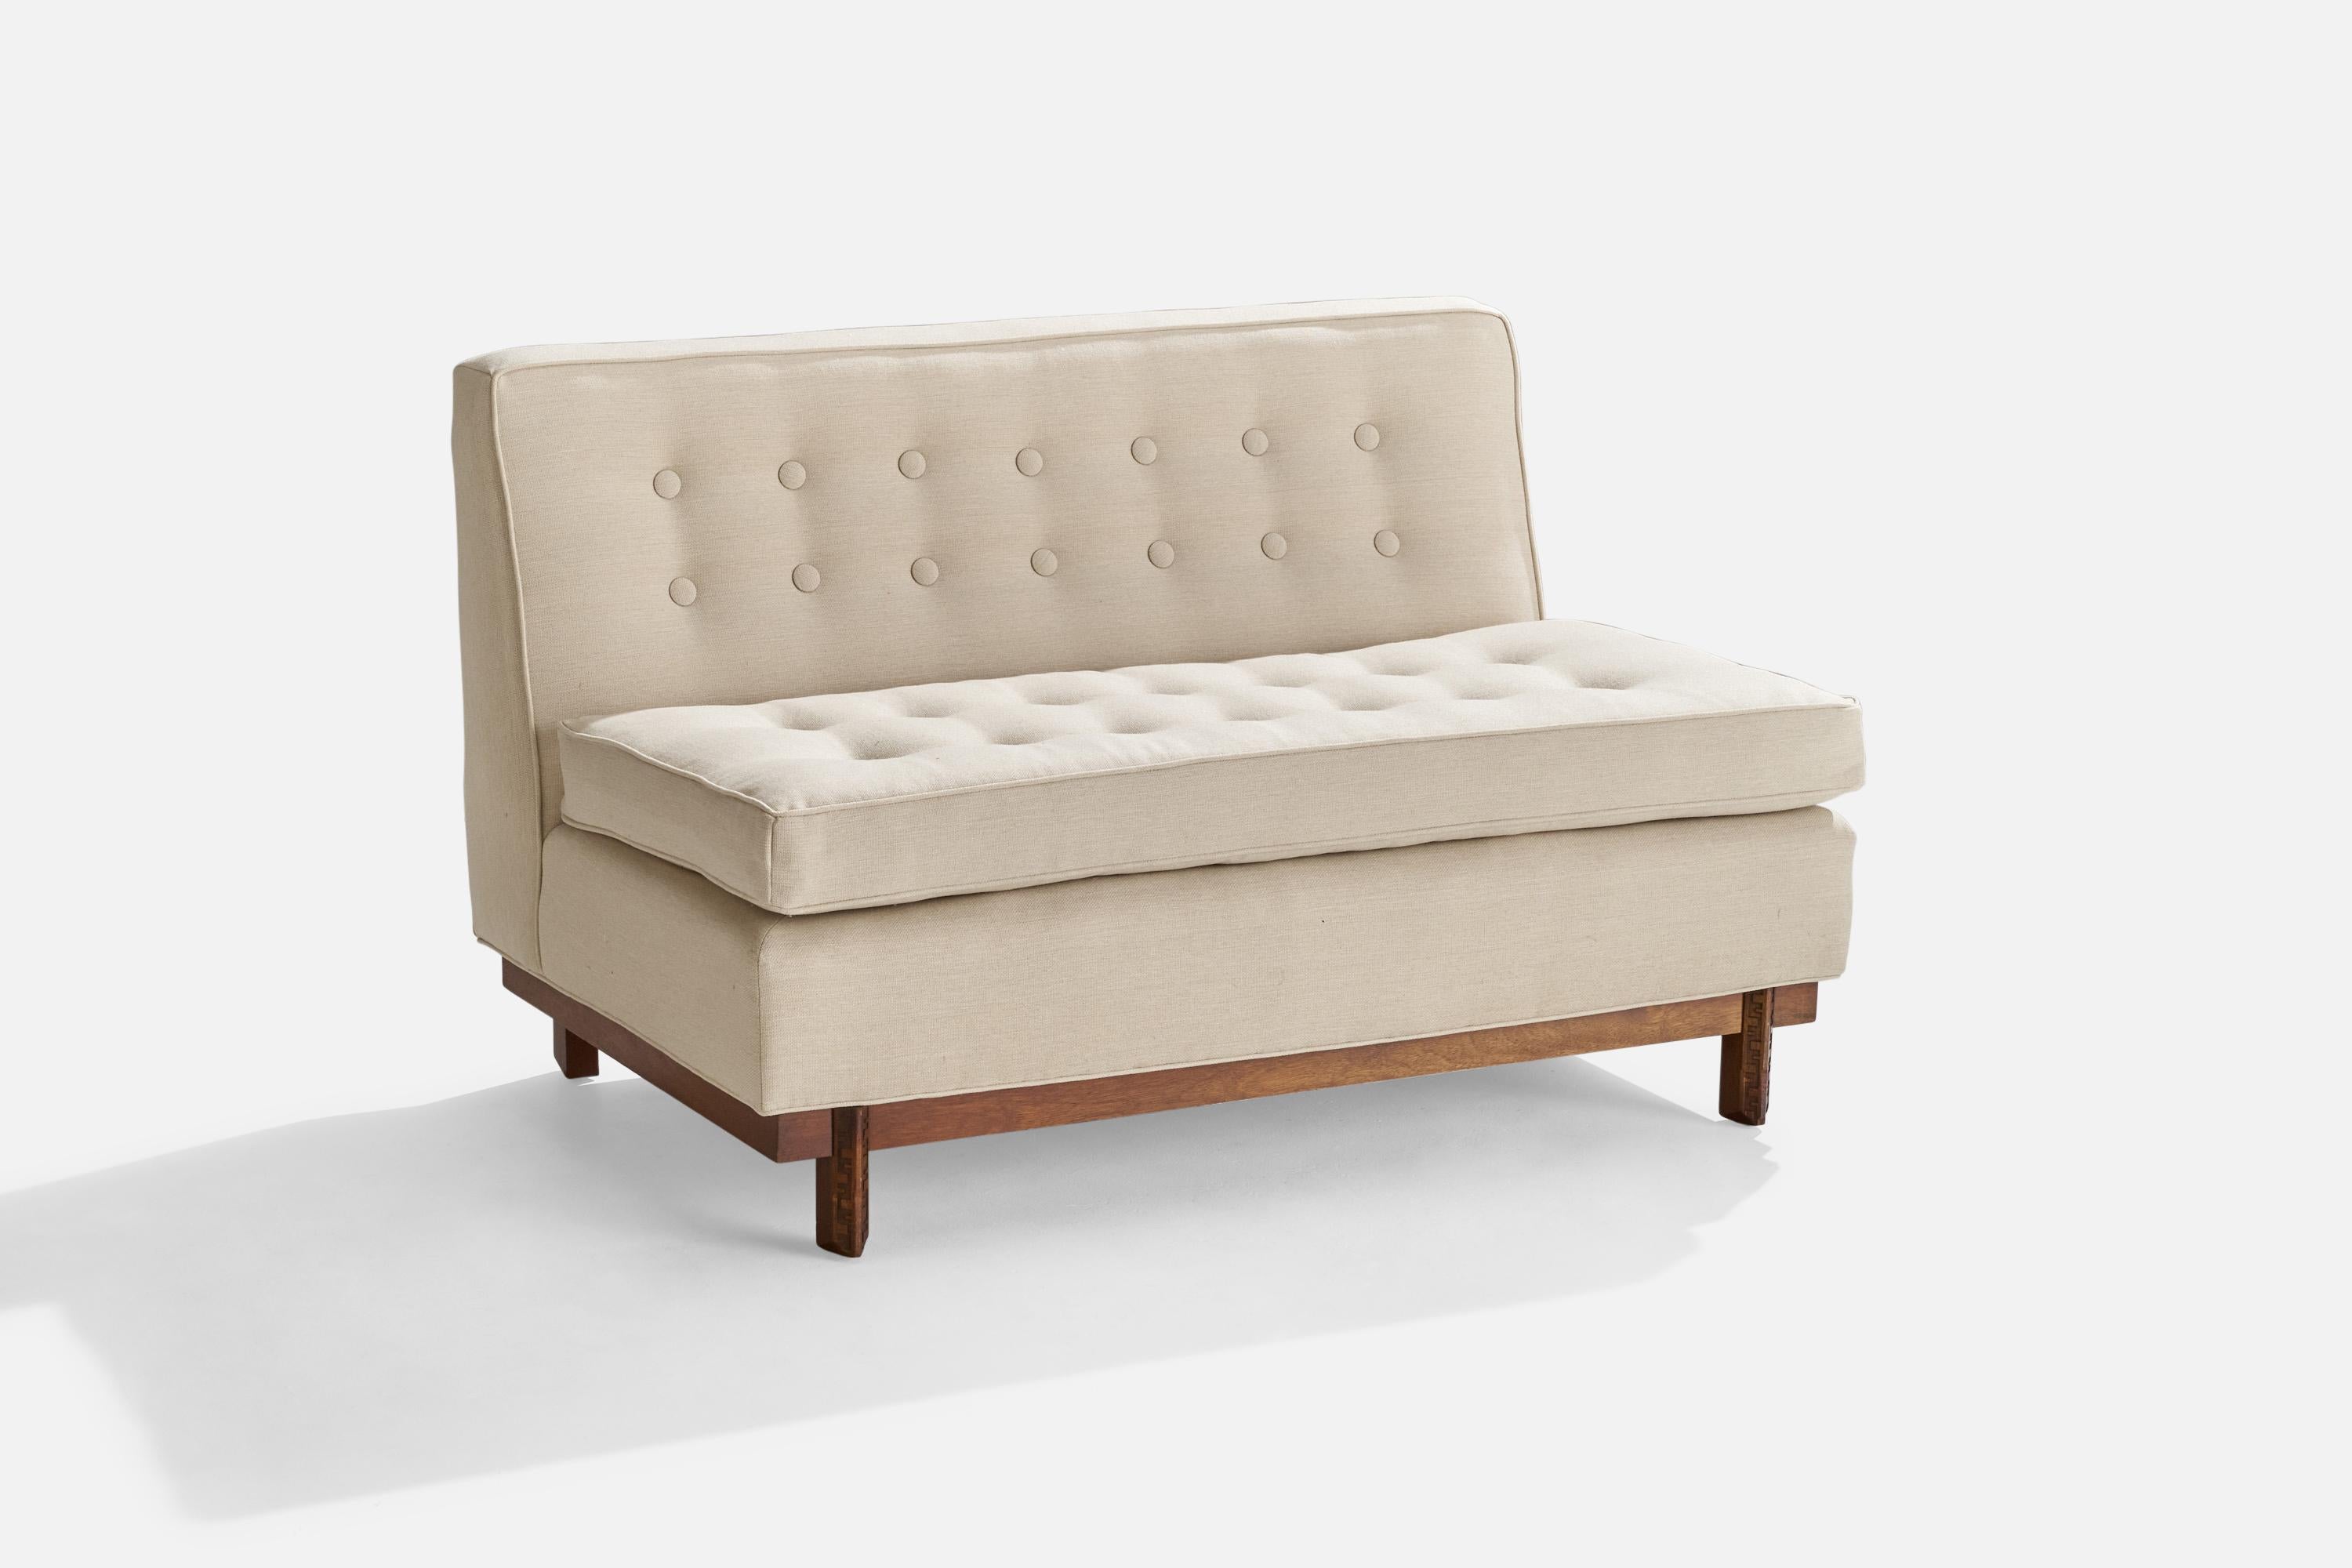 An off-white fabric and mahogany settee or sofa designed by Frank Lloyd Wright and produced by Henredon Furniture, USA, 1956.

Seat height:18.5”